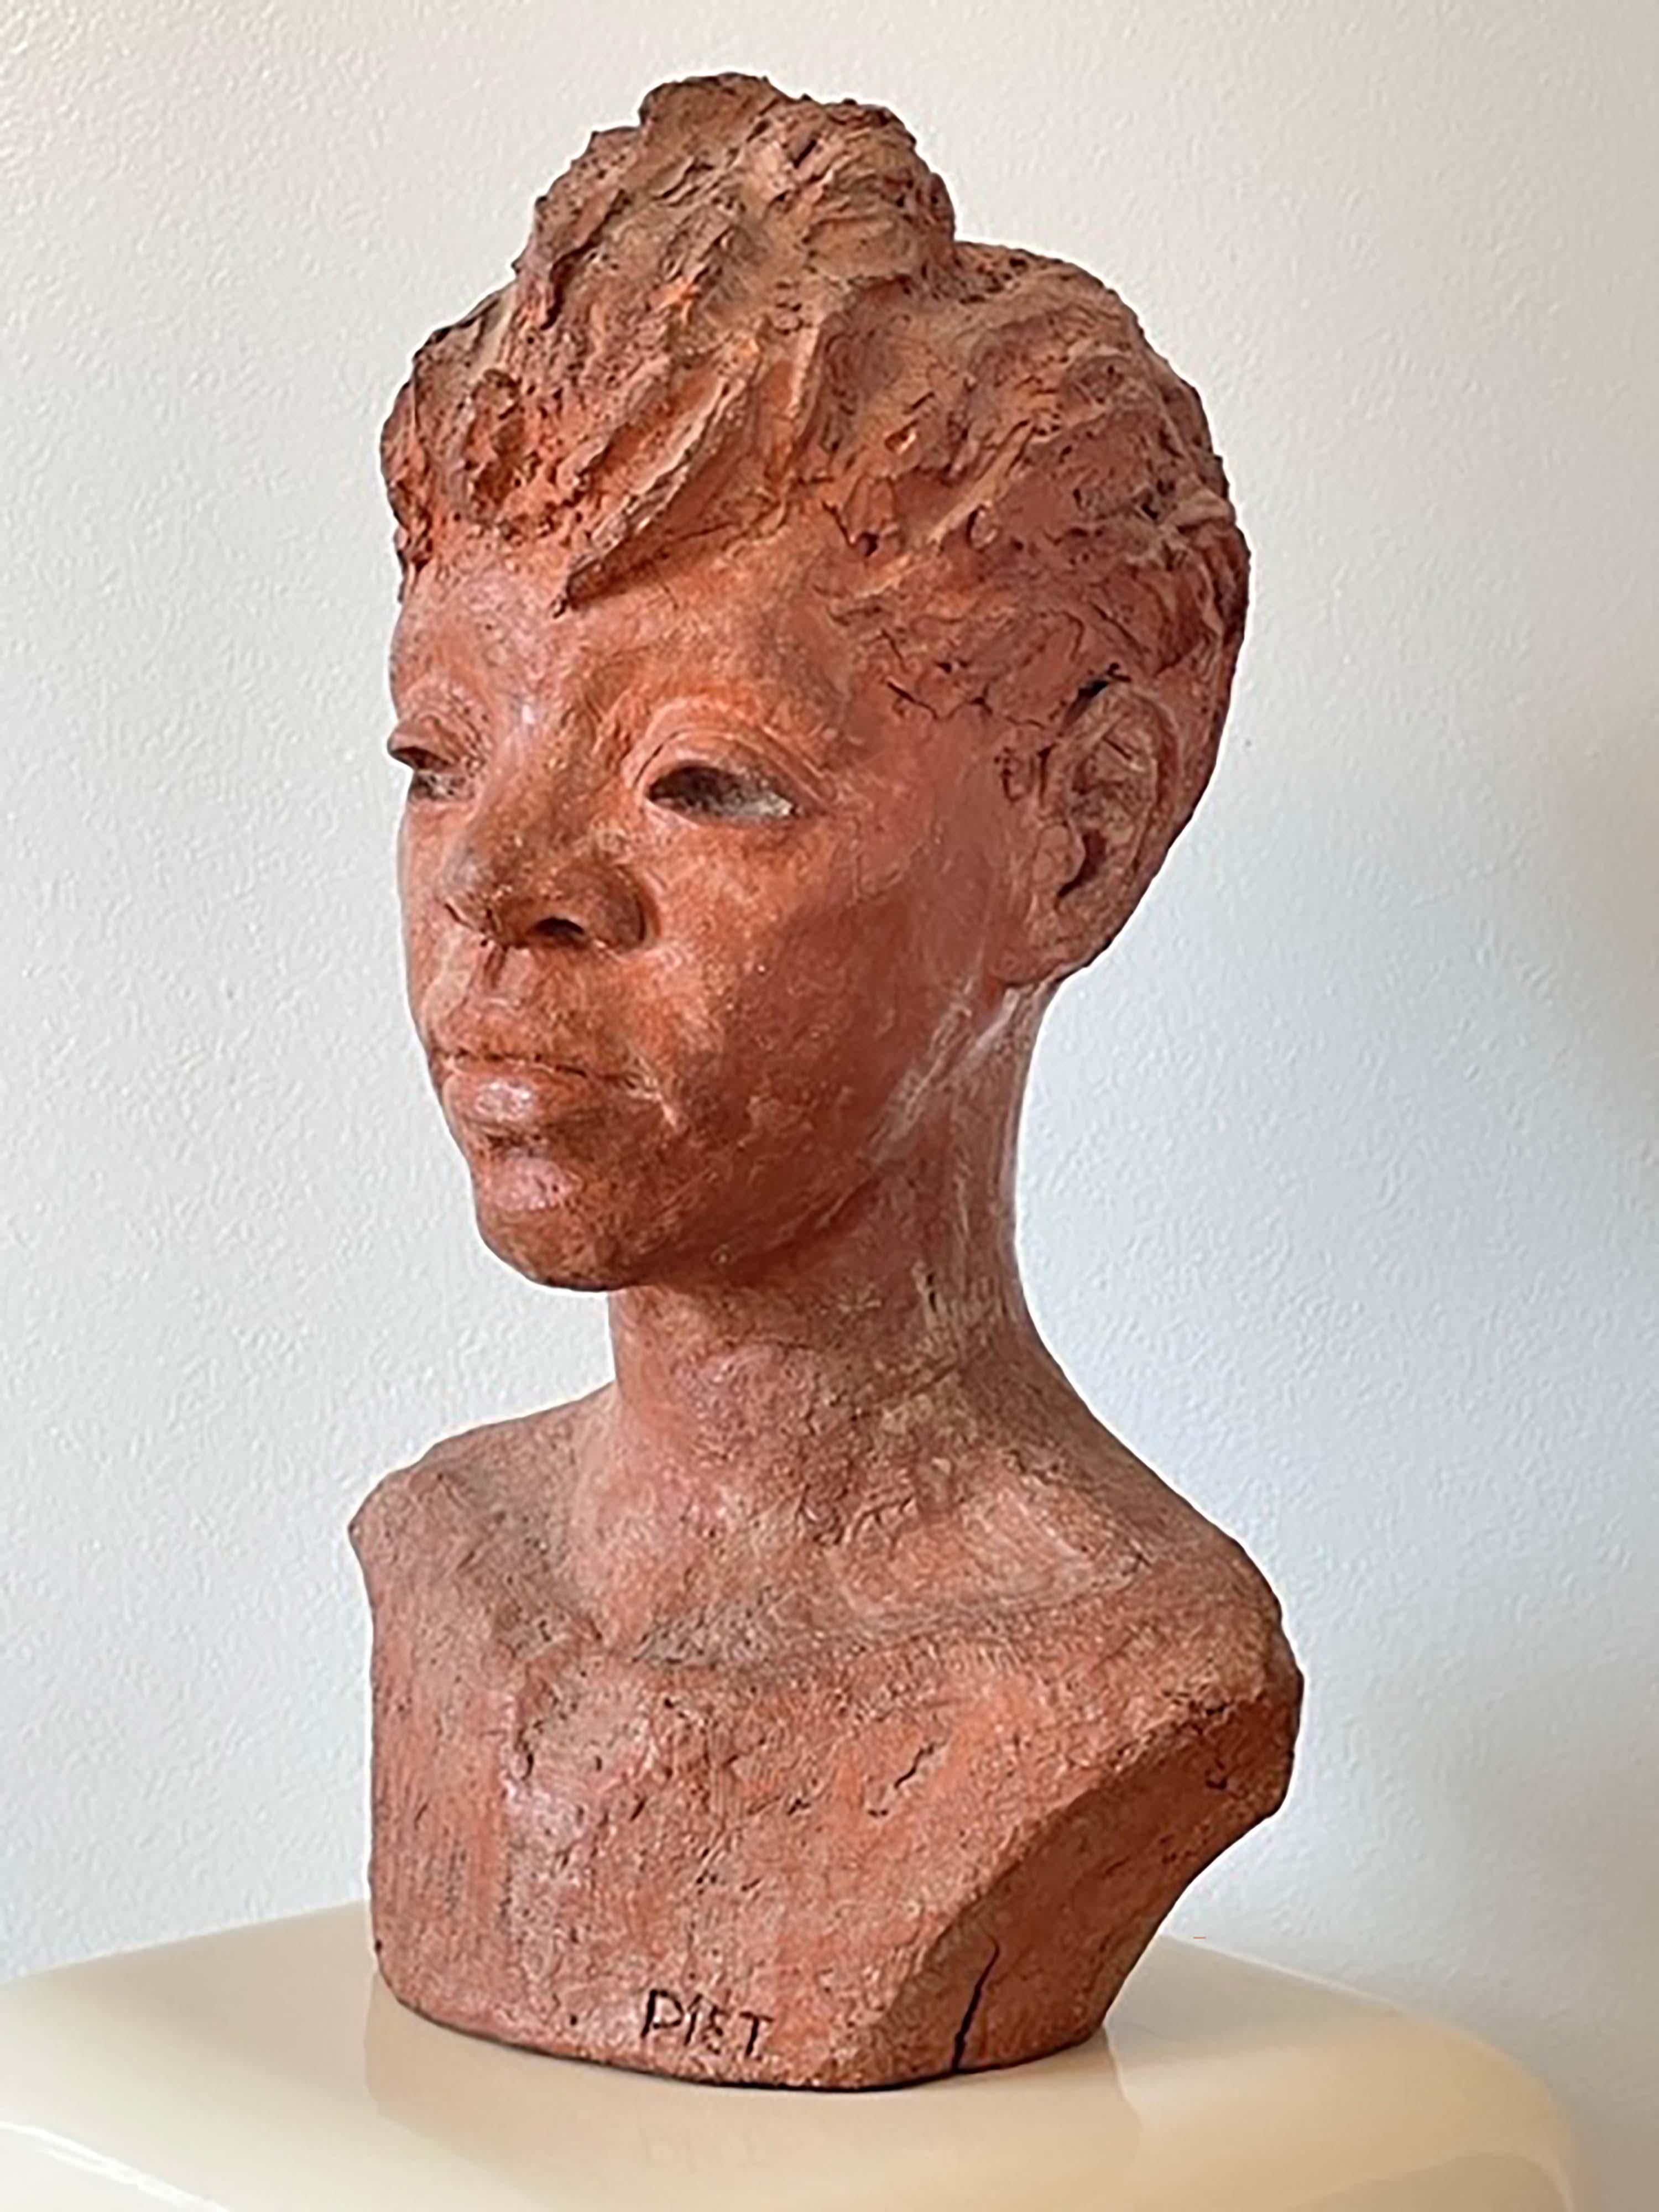 A contemplative modern terracotta ceramic bust sculpture by Michigan artist John Piet. Signed on bottom. Circa mid to late 20th century. A life size sculpture with a certain introspective quality. John Piet was a successful sculptor, ceramicist,